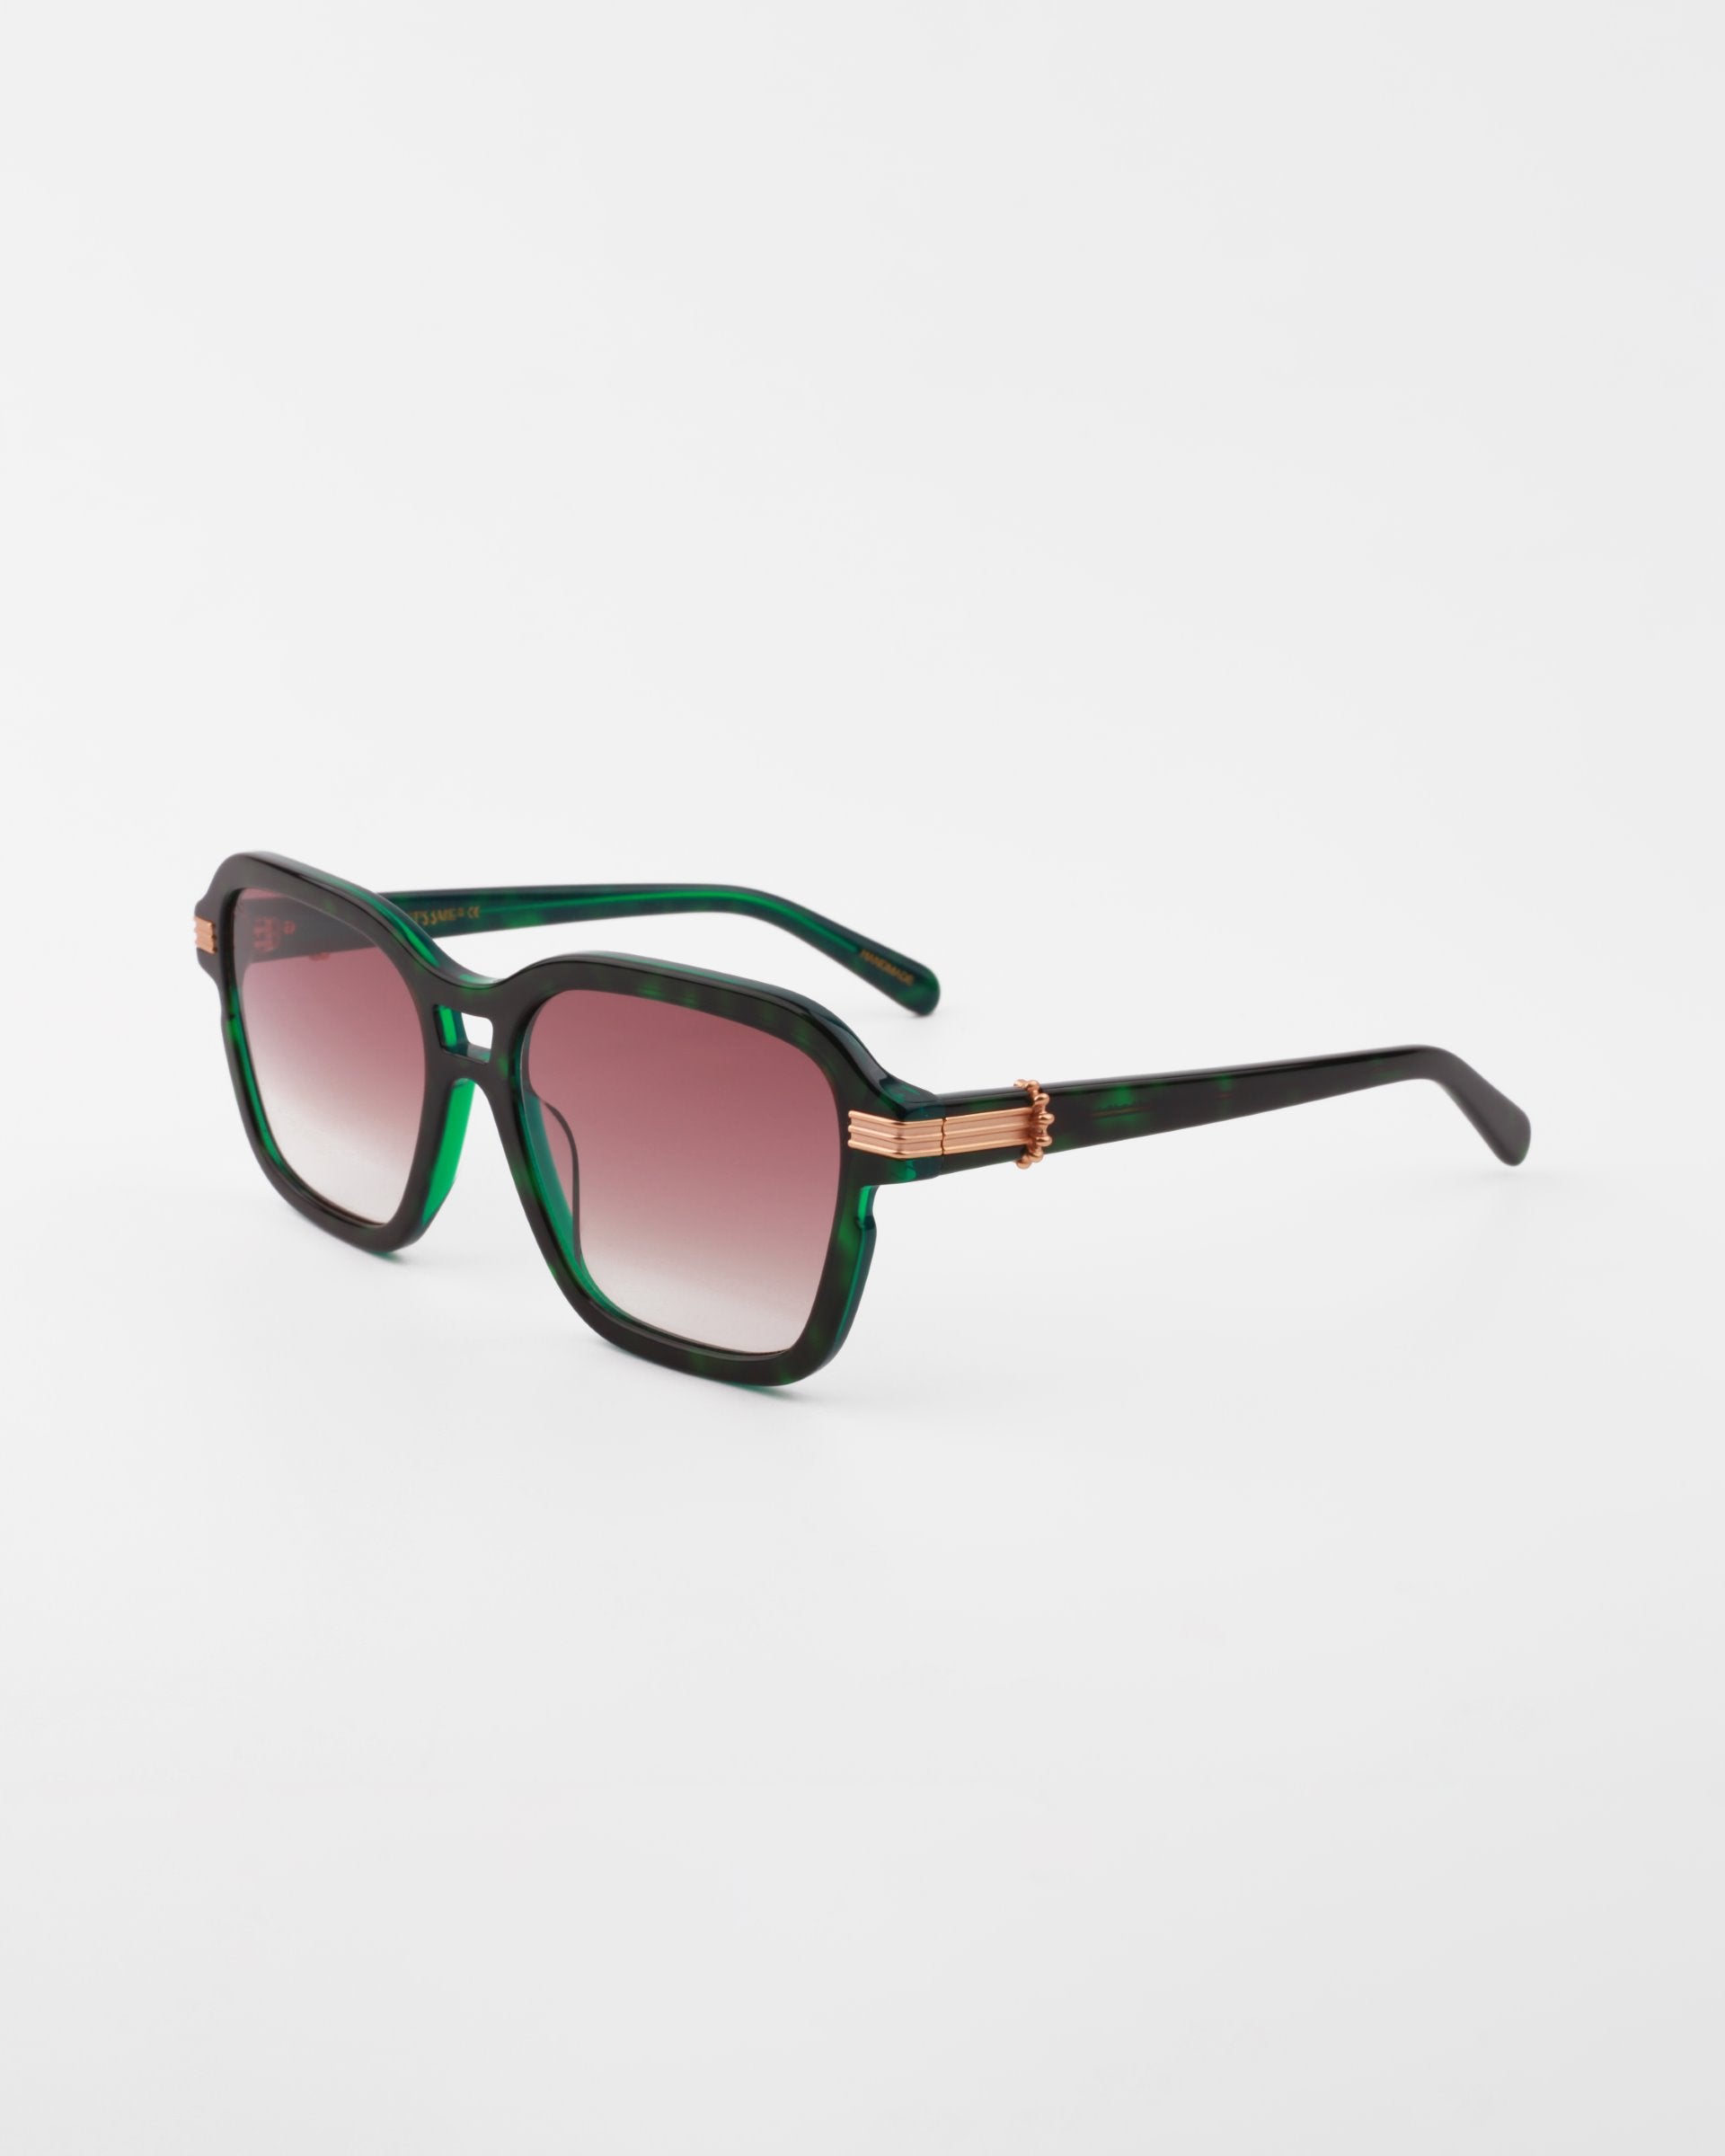 Rectangular gradient green and black Shadyside sunglasses by For Art's Sake® with gold-plated temple detail, positioned on a reflective white surface. The lenses feature a brown gradient tint and are made from shatter-resistant nylon.